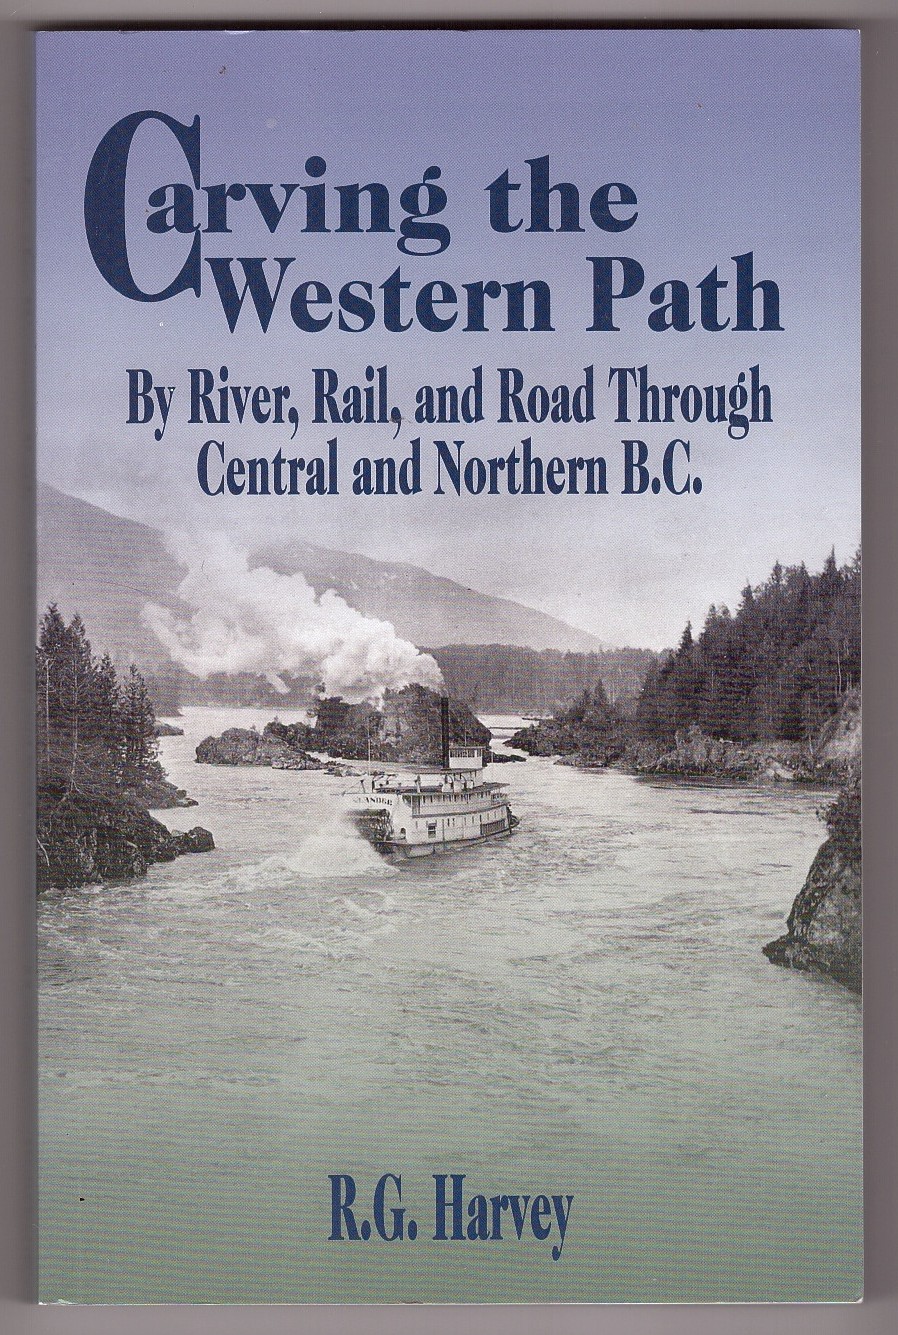 HARVEY, R. G. - Carving the Western Path By River, Rail, and Road Through Central and Northern Bc